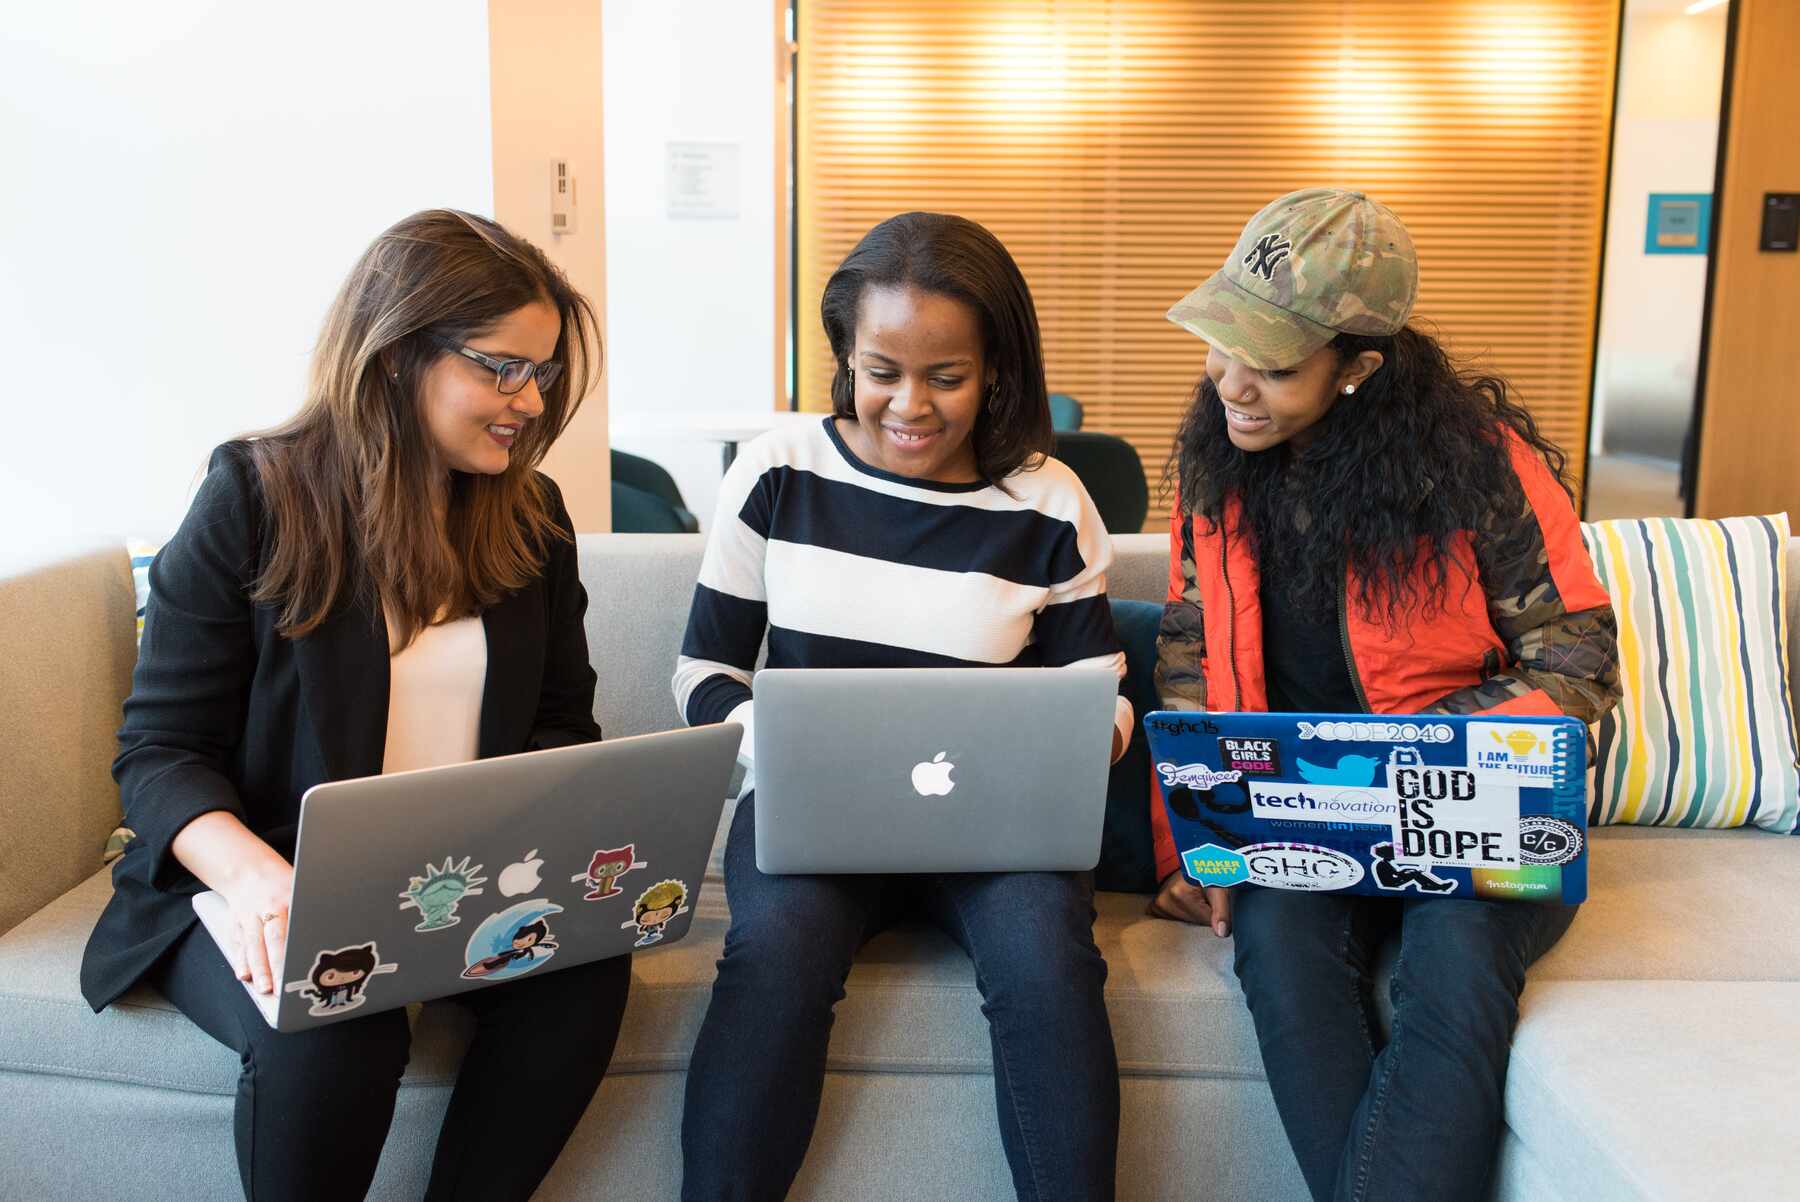 Three women using their laptops while sitting on the couch